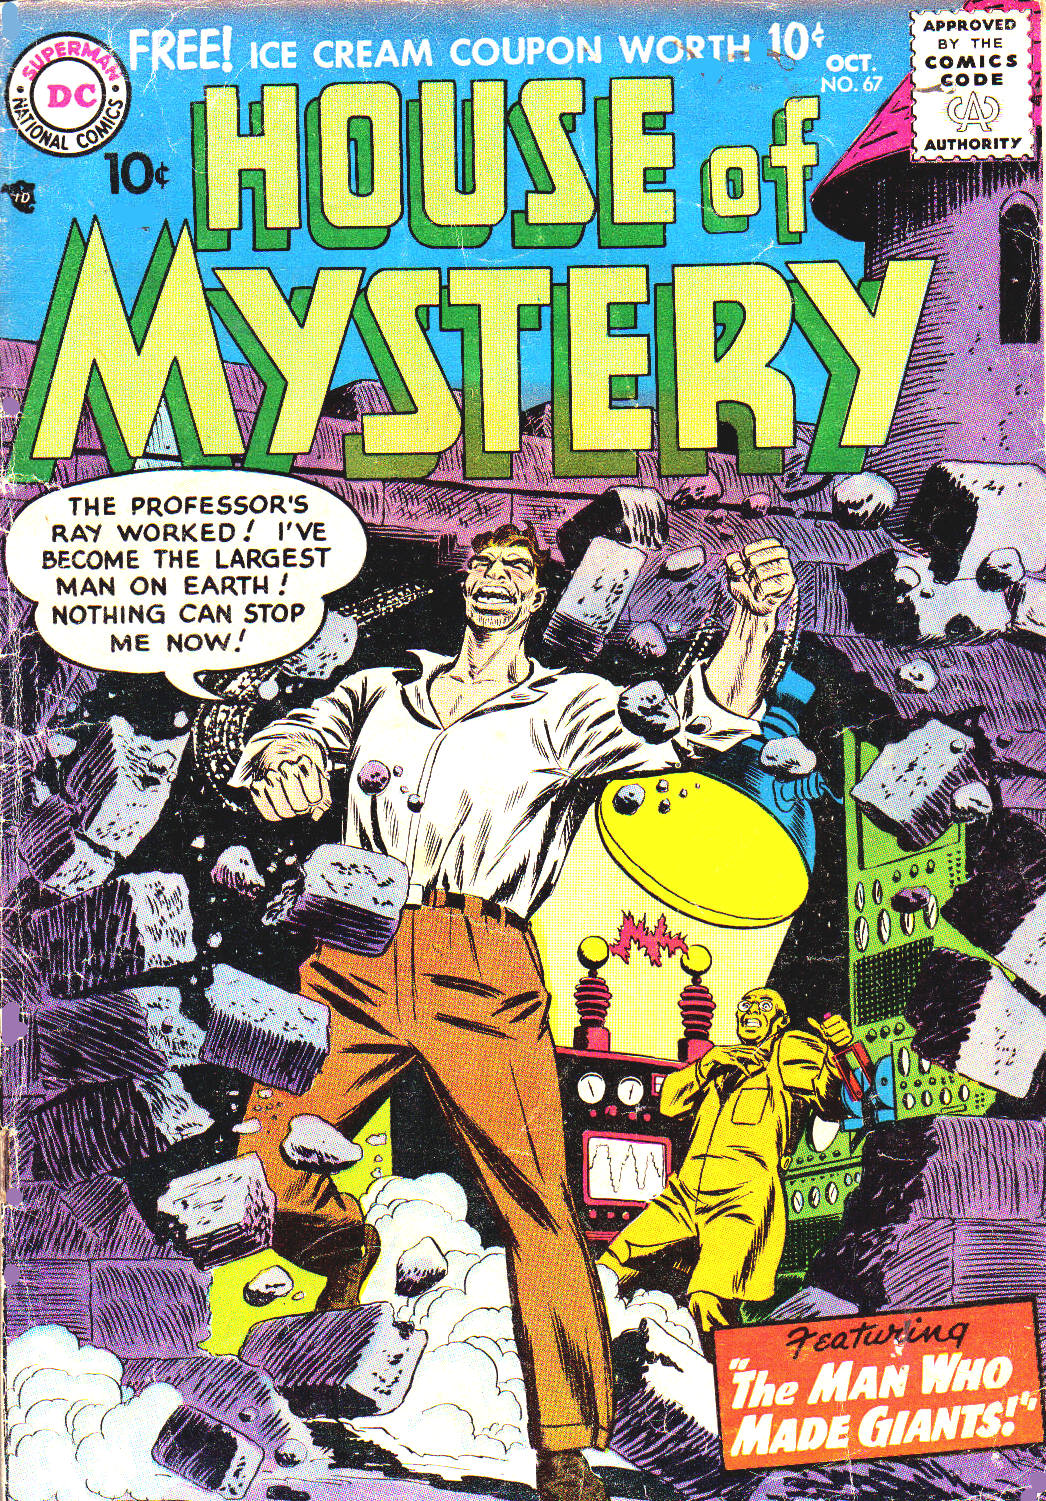 Read online House of Mystery (1951) comic -  Issue #67 - 1